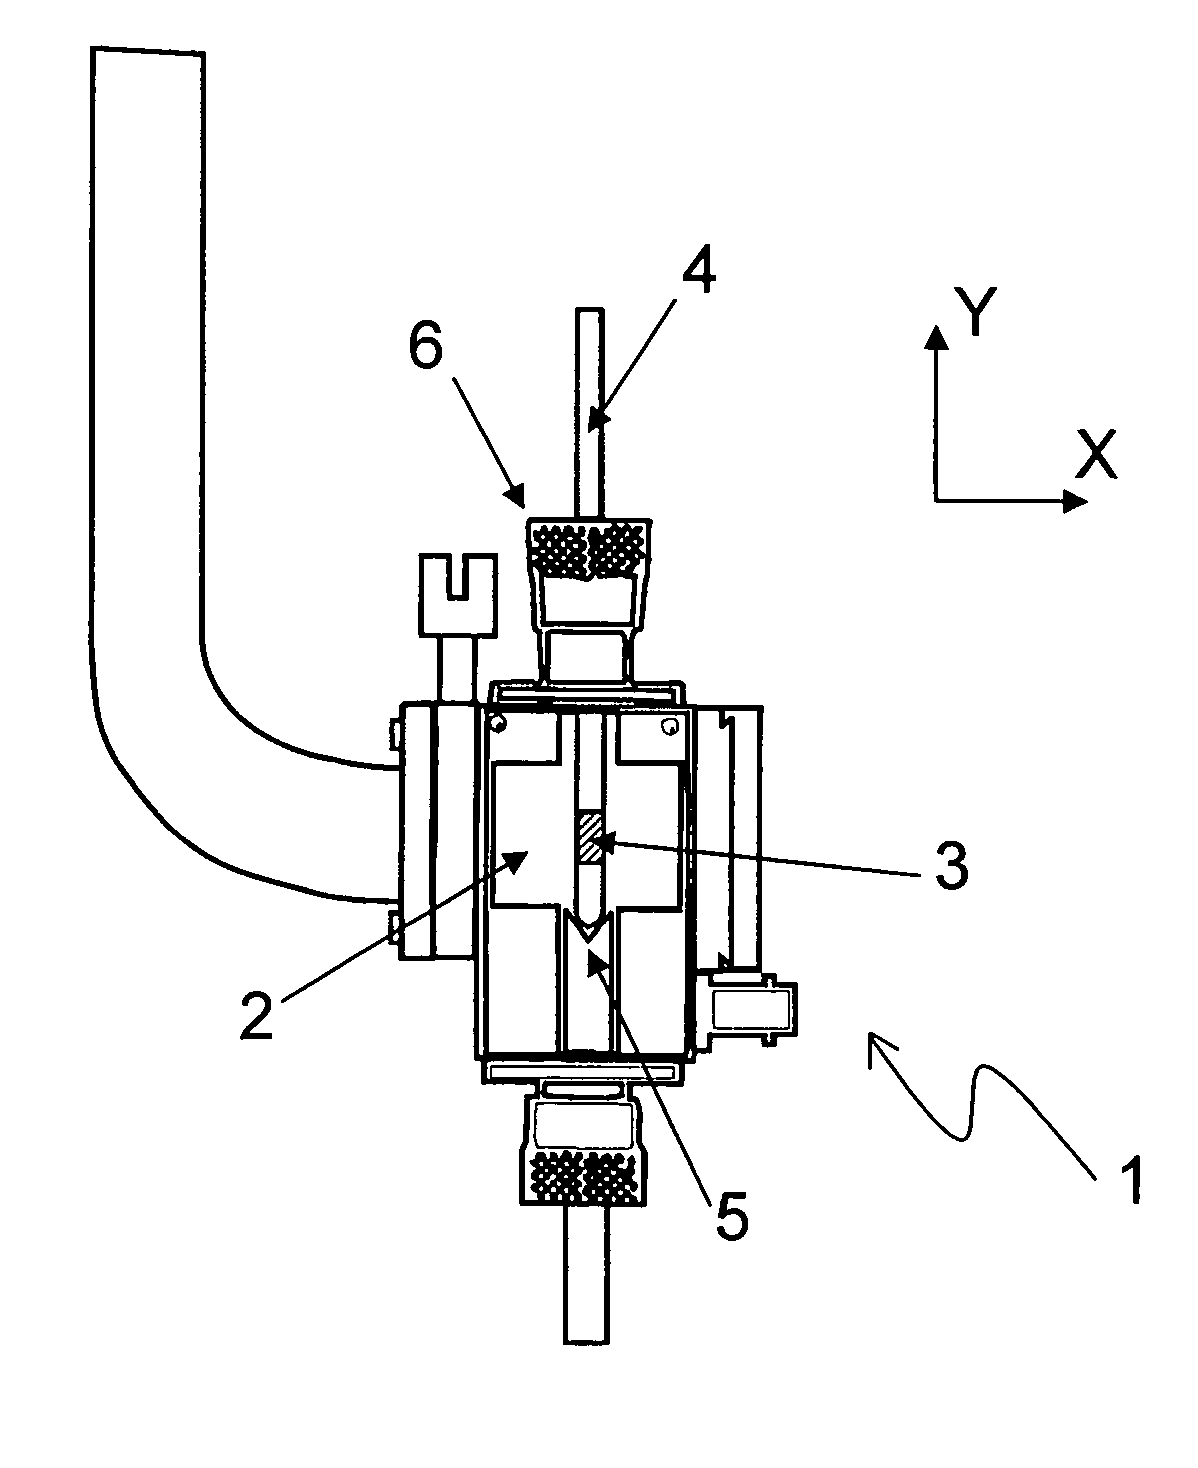 Method for determining the absolute number of electron spins in a sample of extended size